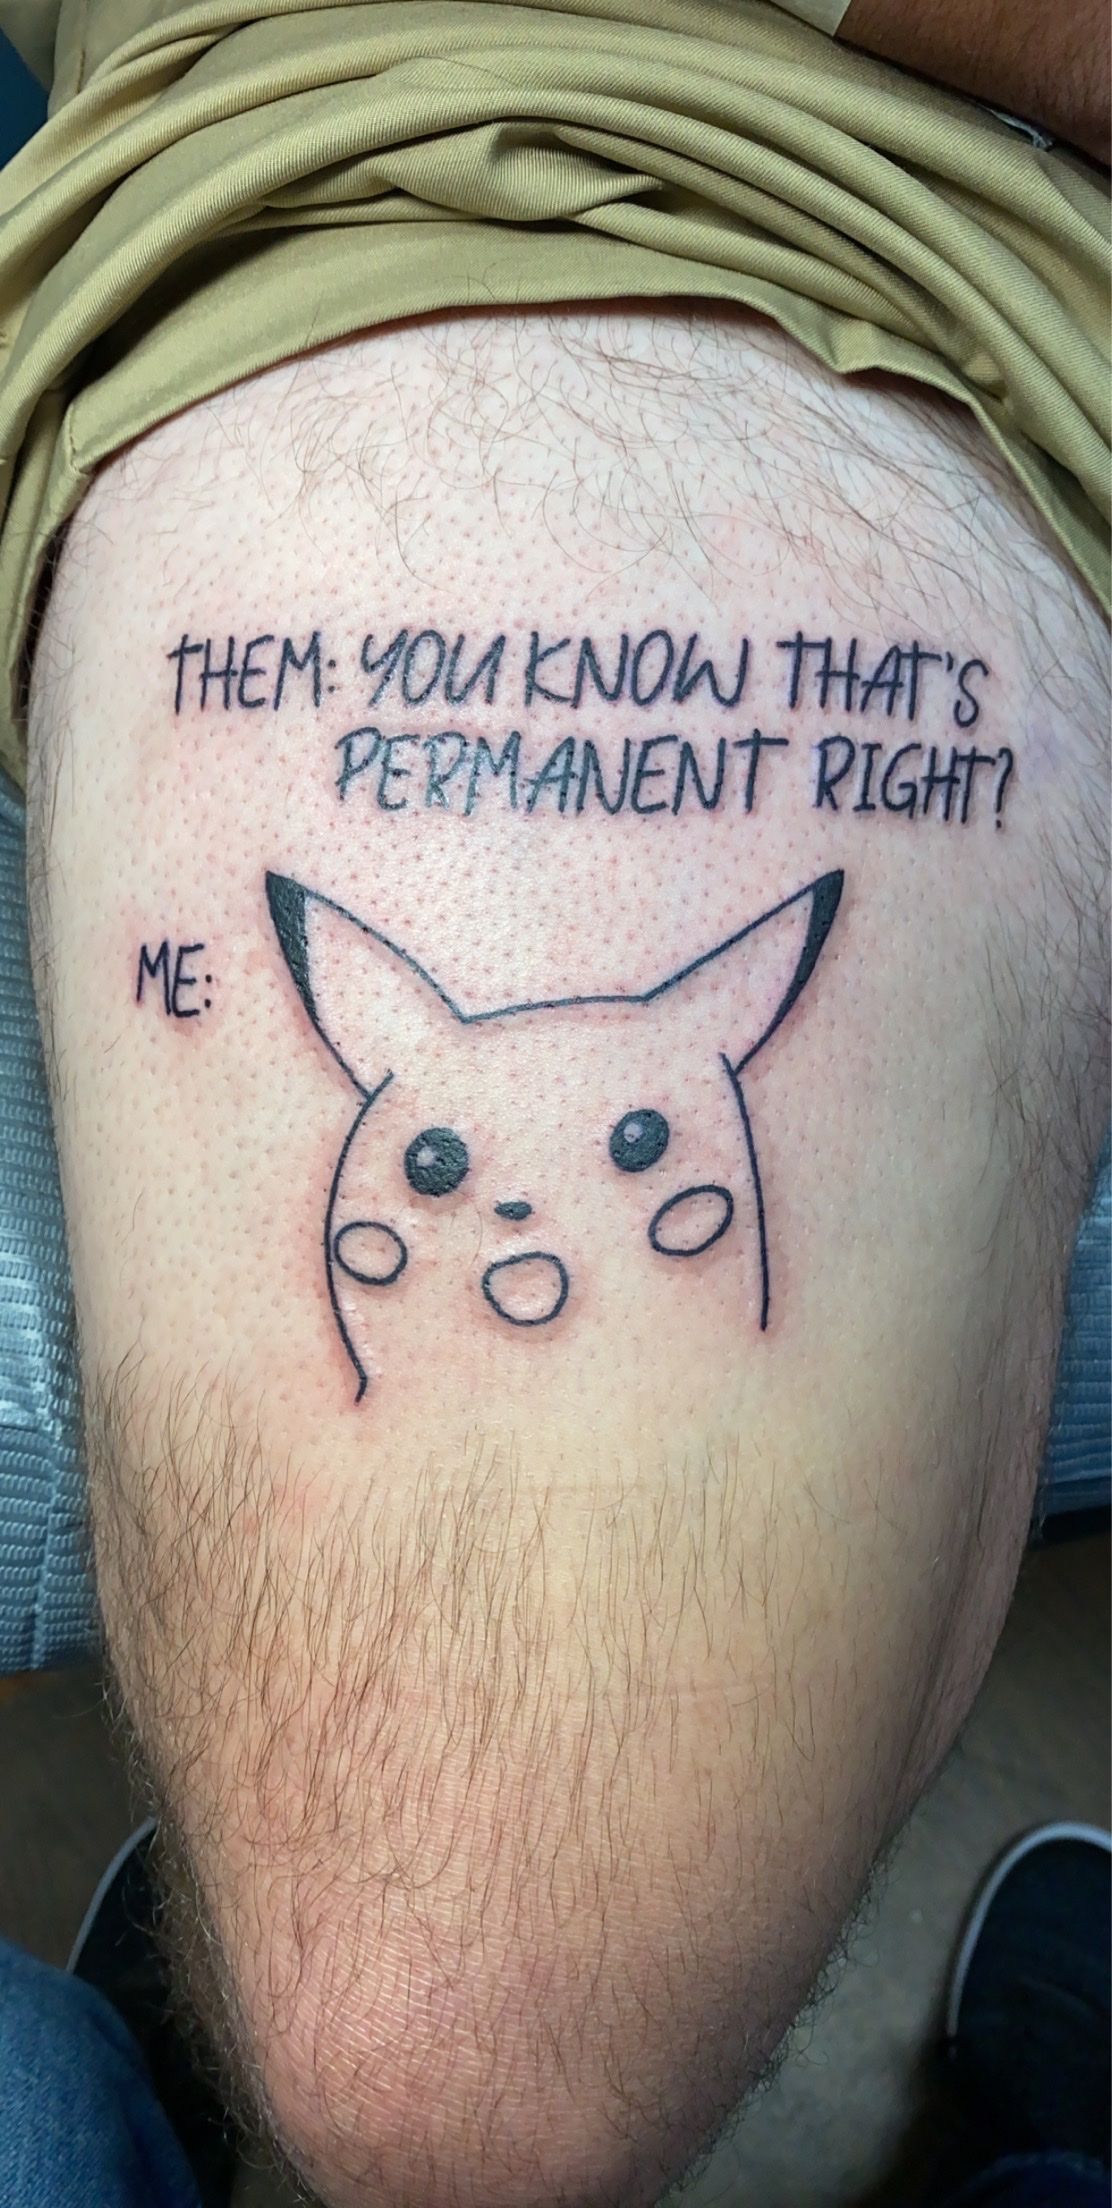 You know that's permanent right?? Credit: Electric Monk Tattoo : r/memes